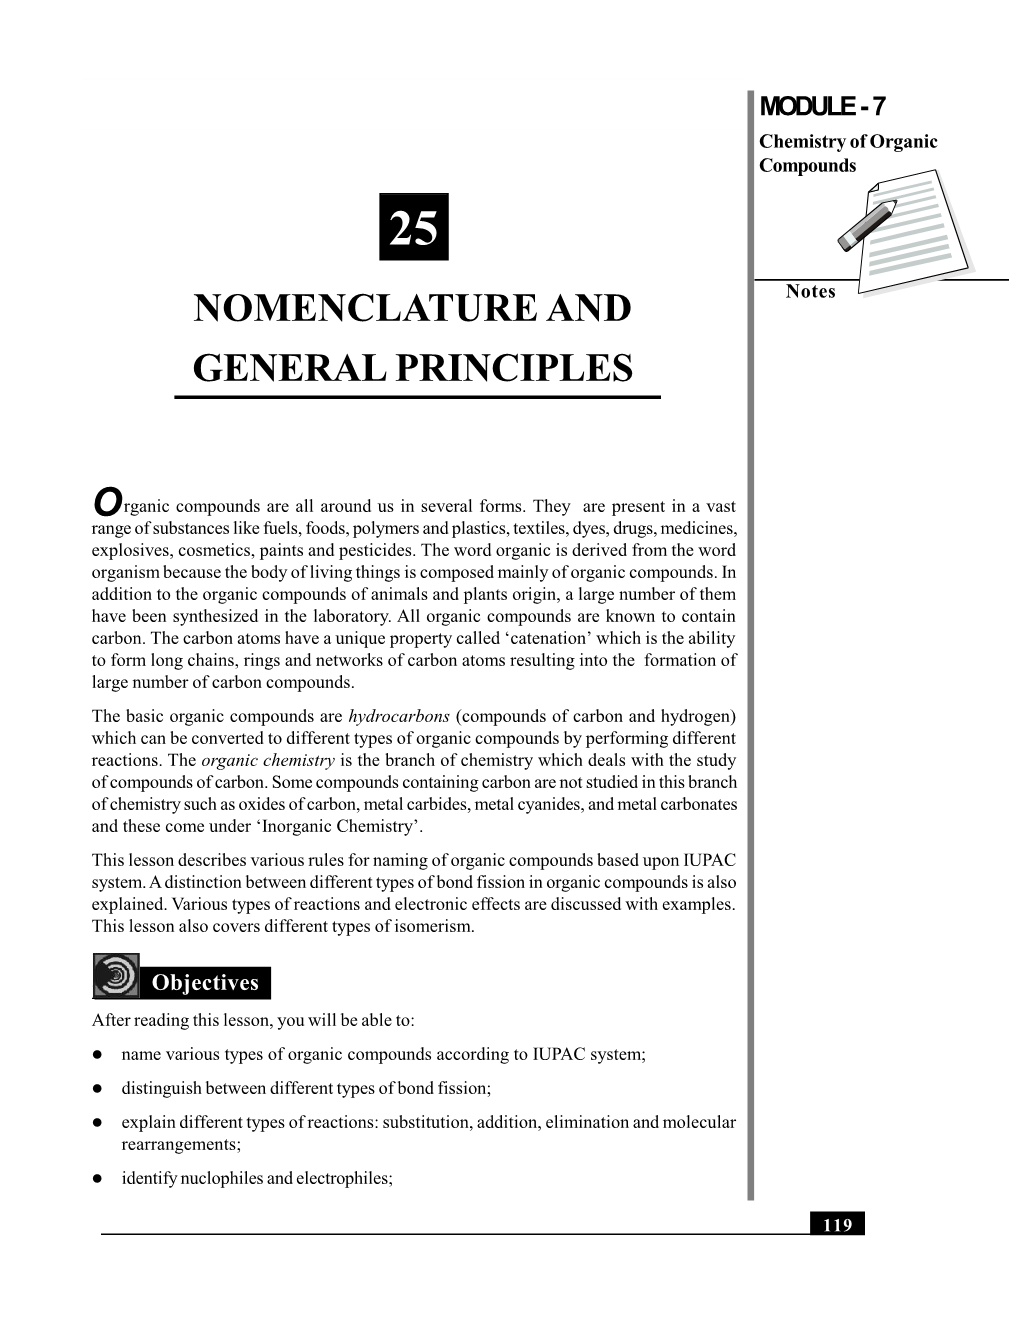 Nomenclature and General Principles MODULE - 7 Chemistry of Organic Compounds 25 NOMENCLATURE and Notes GENERAL PRINCIPLES